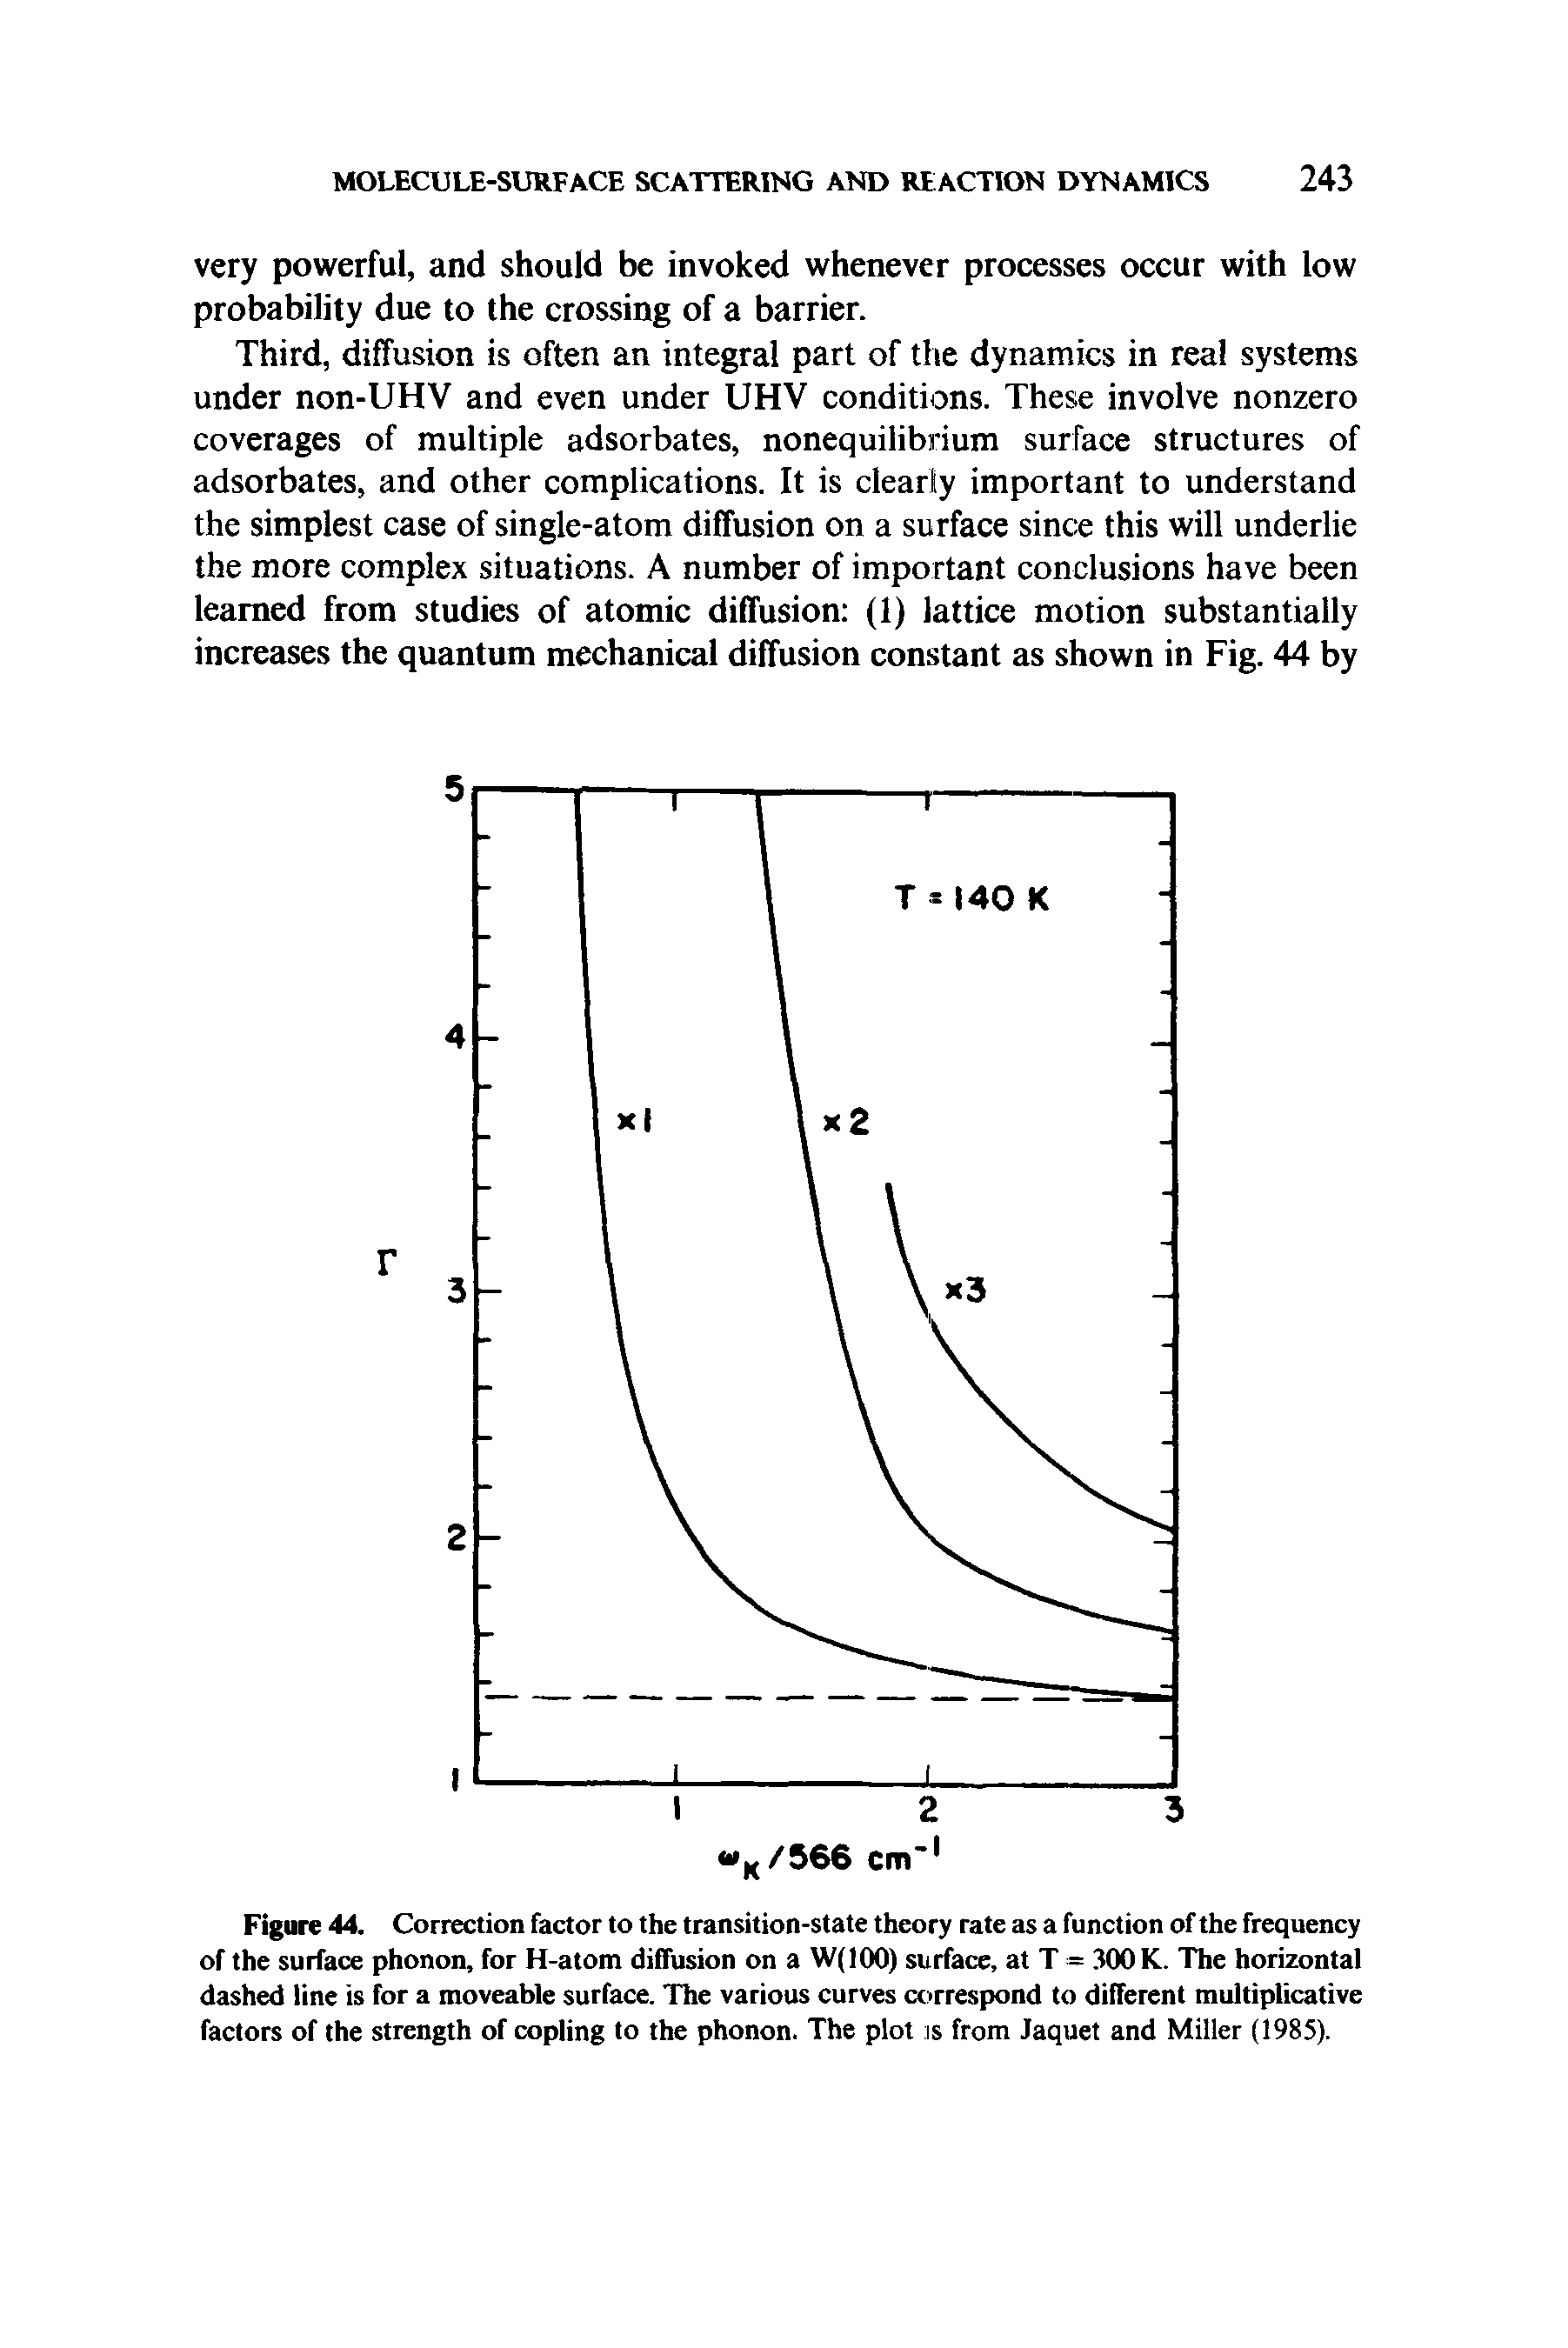 Figure 44. Correction factor to the transition-state theory rate as a function of the frequency of the surface phonon, for H-atom diffusion on a W(IOO) surface, at T = 300 K. The horizontal dashed line is for a moveable surface. The various curves correspond to different multiplicative factors of the strength of copling to the phonon. The plot is from Jaquet and Miller (1985).